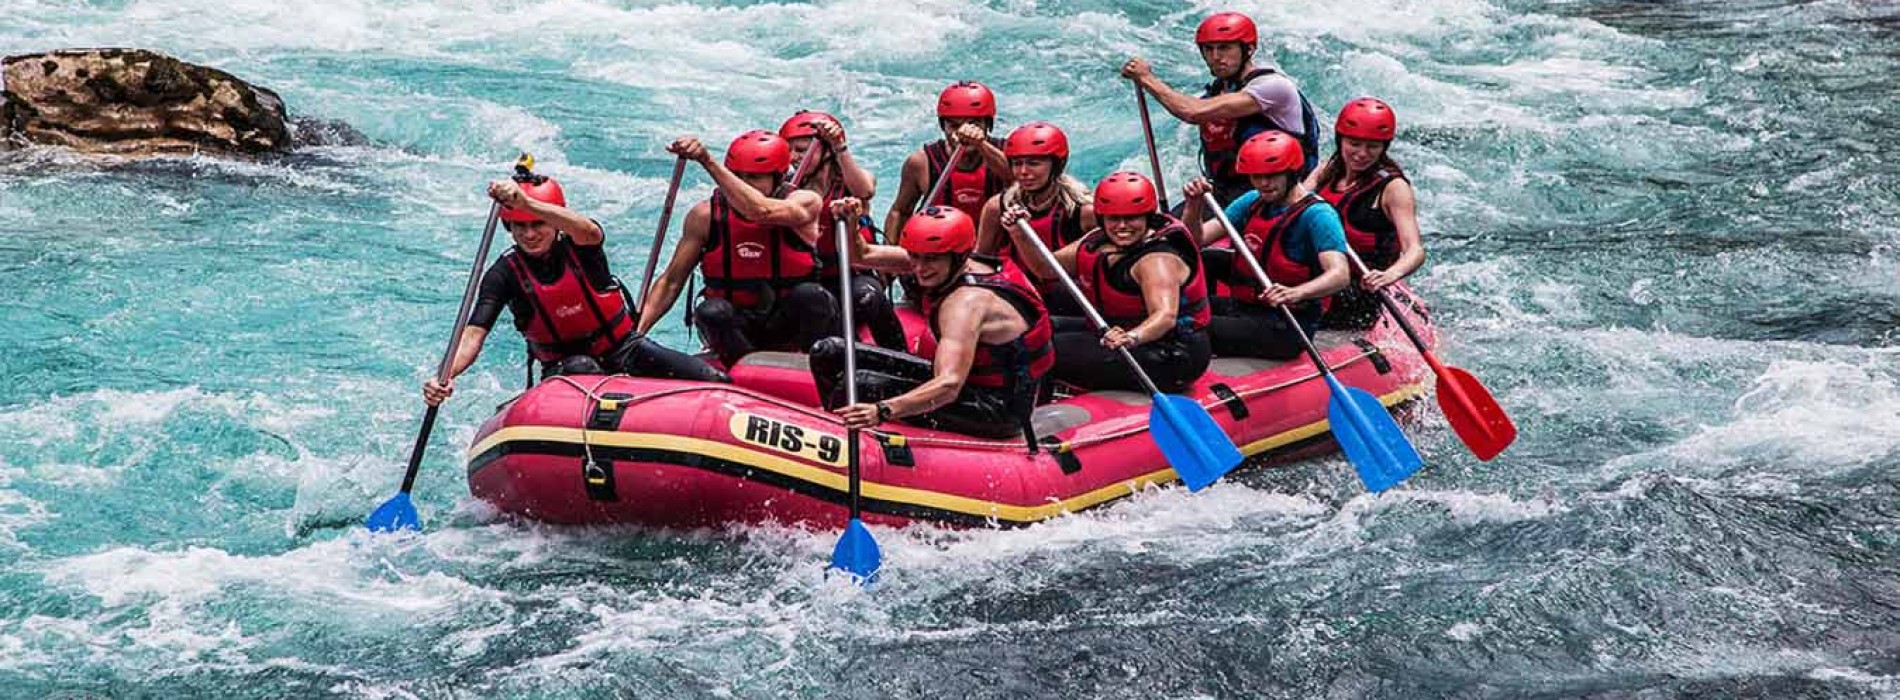 A better deal is needed for adventure tourism post HC’s ban on water sports